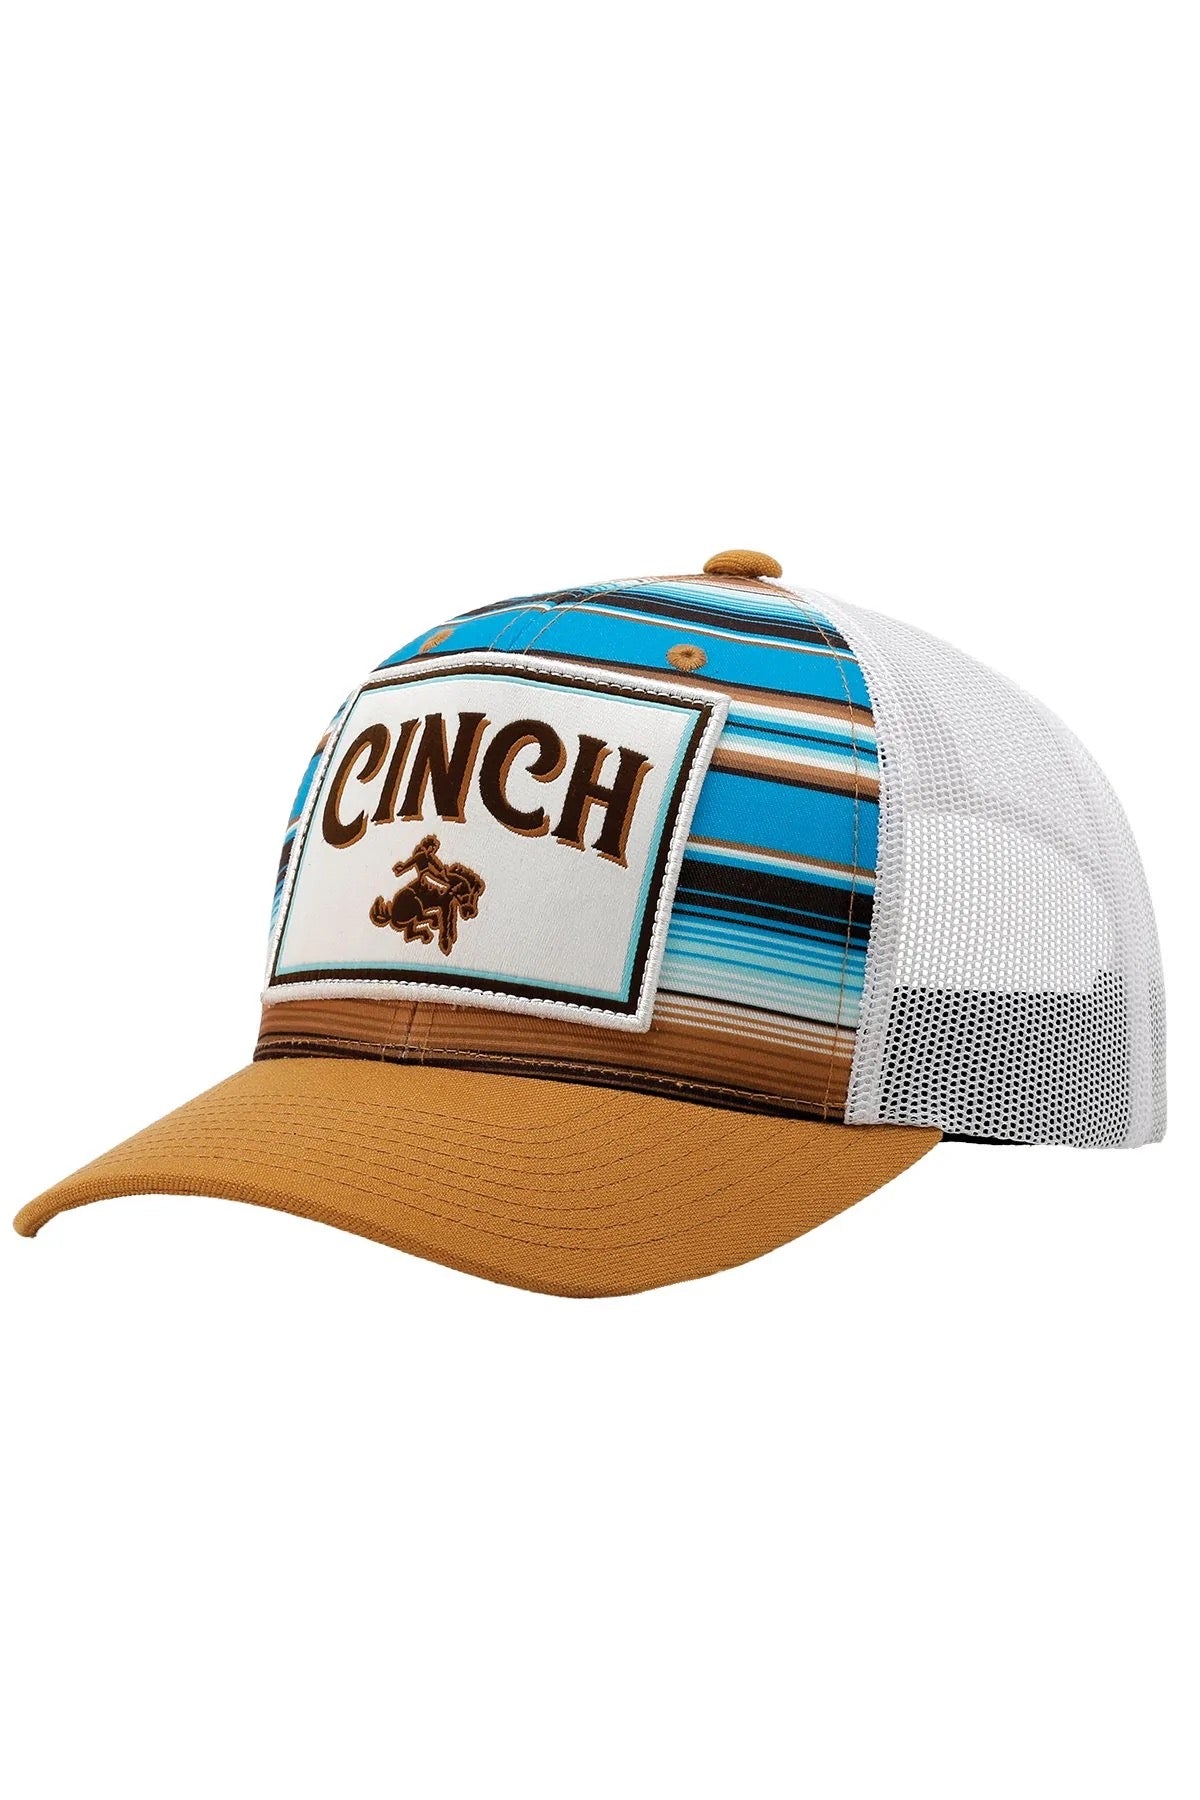 CINCH MENS TOFFEE/ TURQUOISE STRIPED BASEBALL CAP CAP